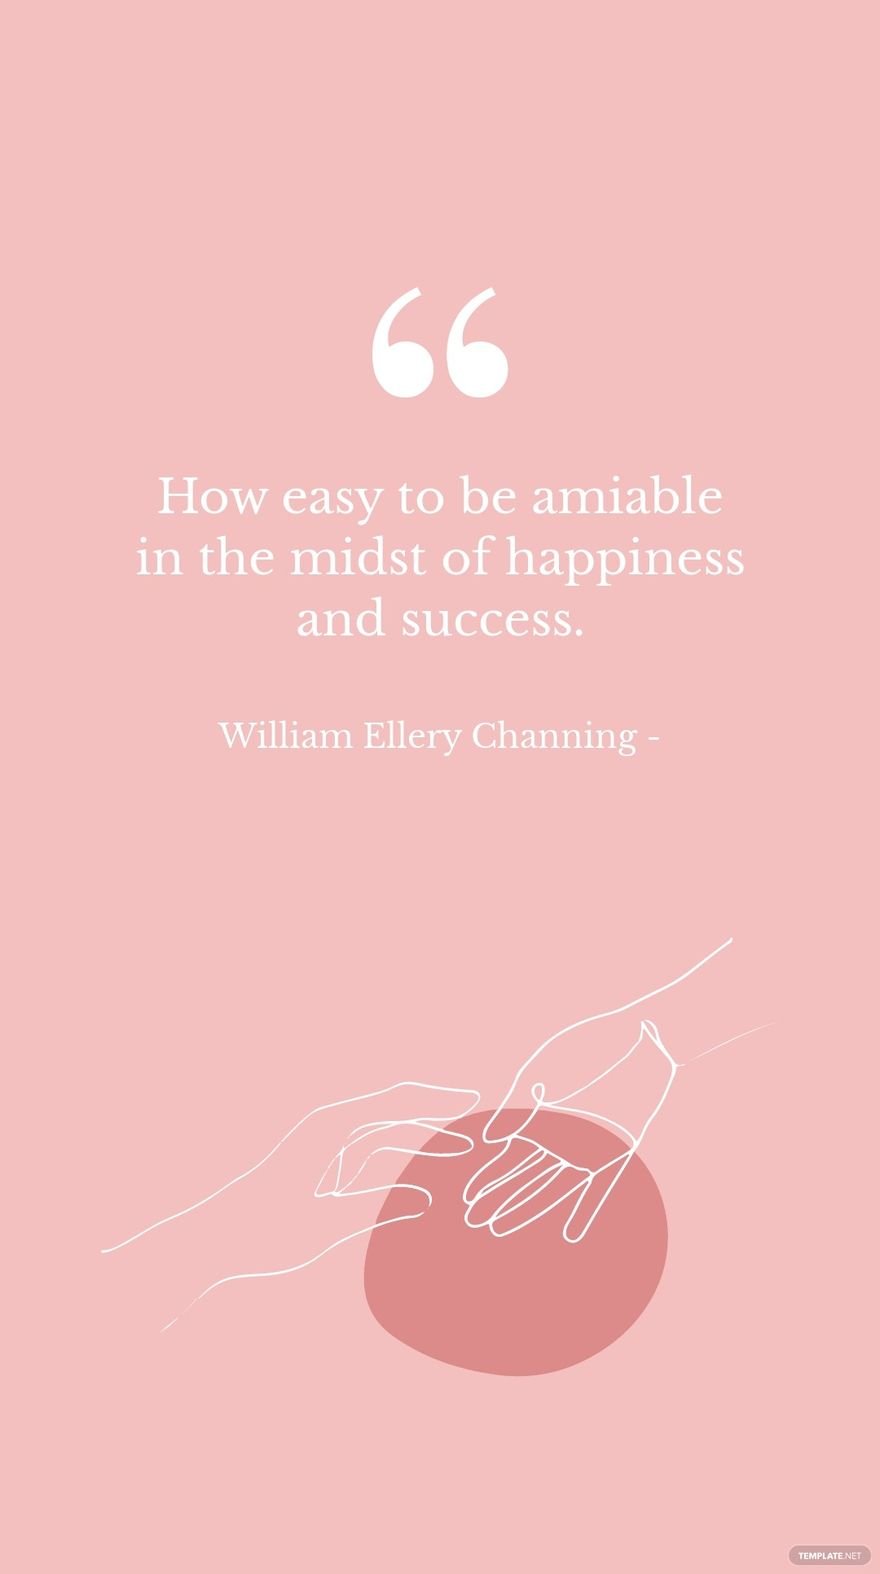 Free William Ellery Channing - How easy to be amiable in the midst of happiness and success. in JPG